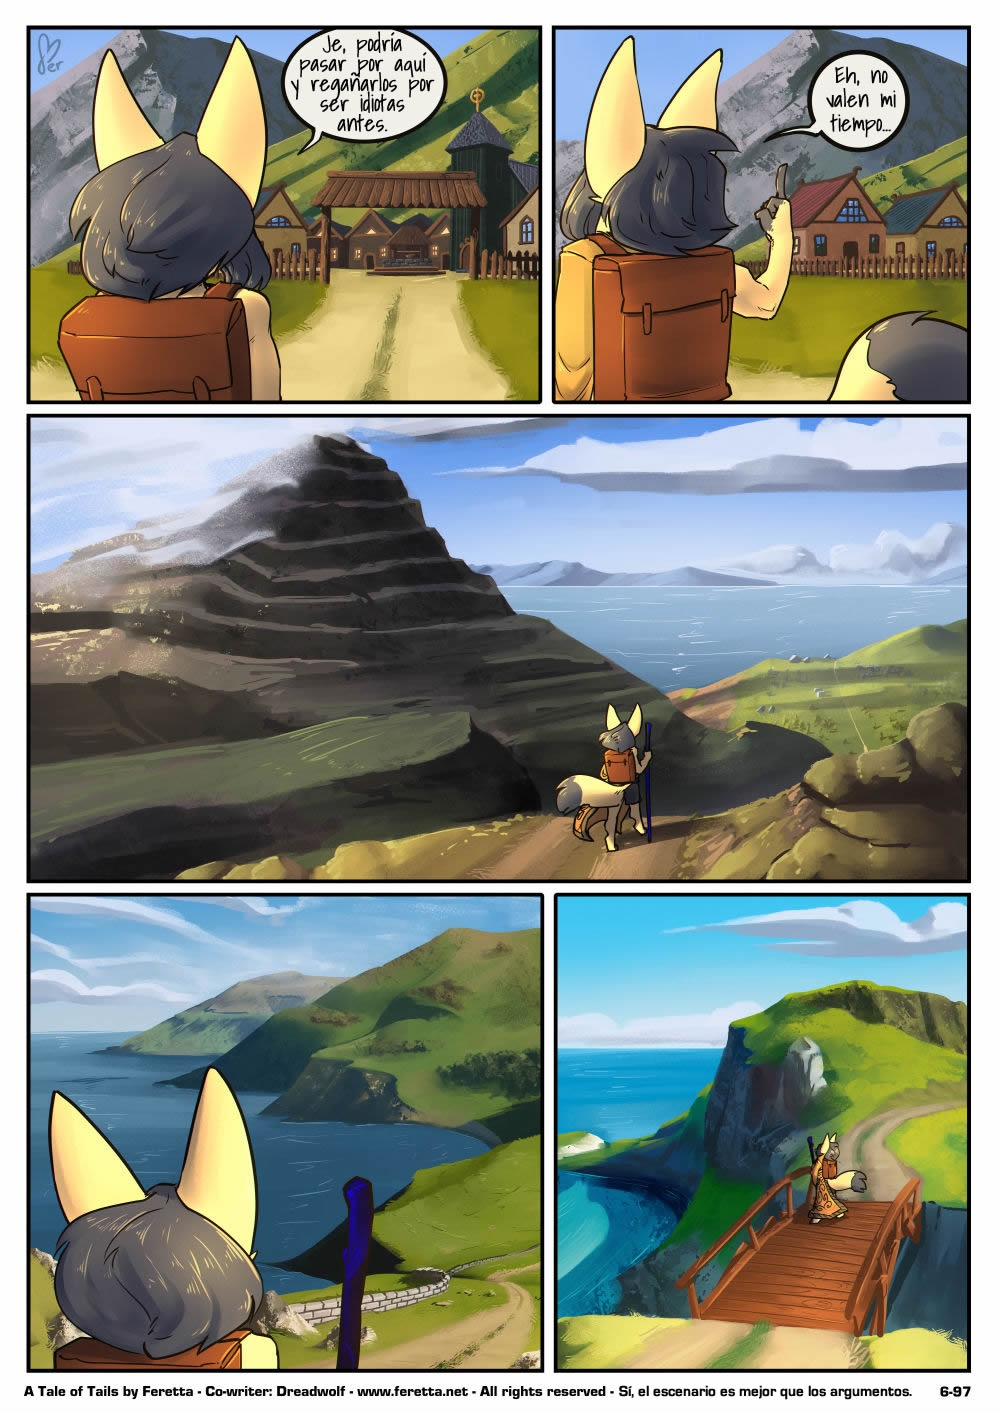 [Feretta] A Tale of Tails: Chapter 6 - Paths converge / Los caminos convergen [Spanish] [Red Fox Makkan] 97